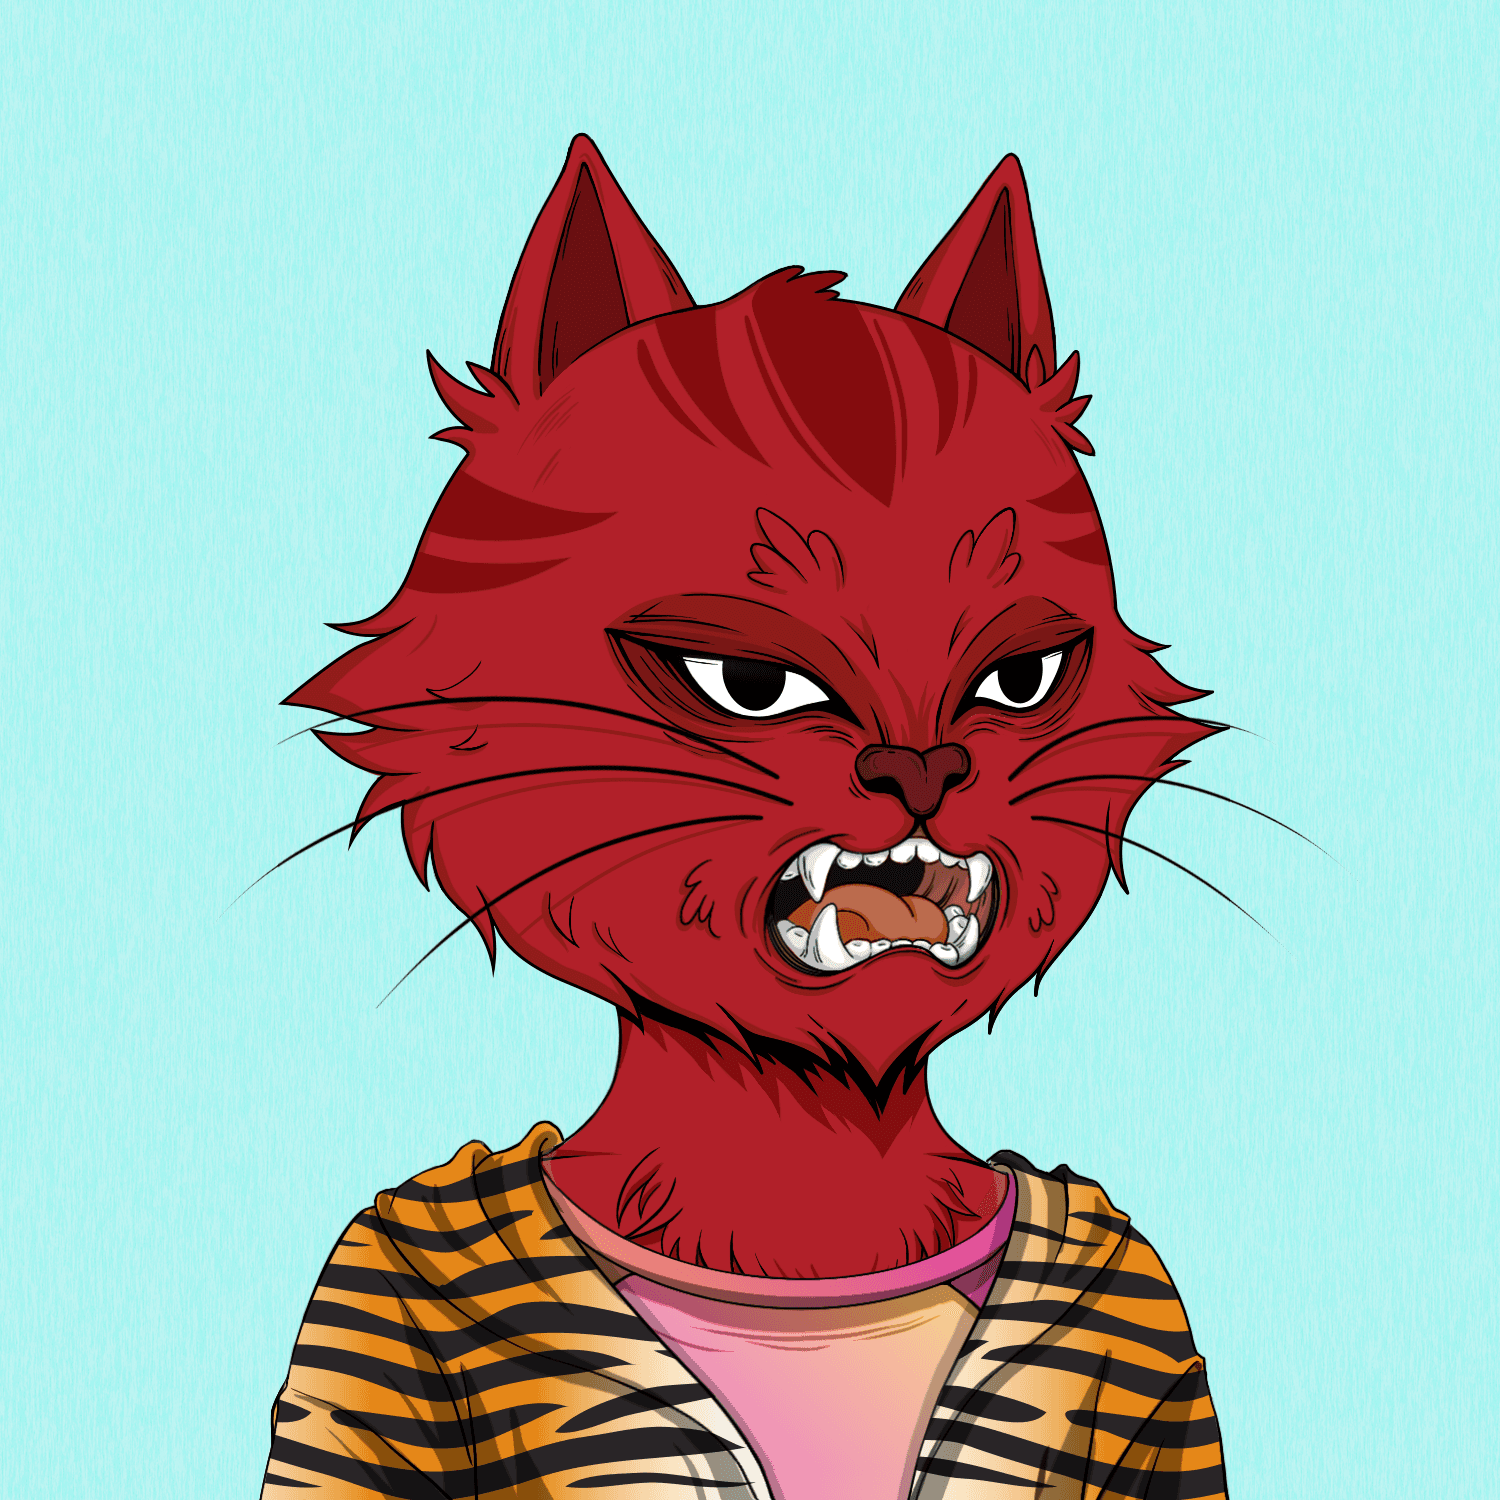 Angry Cat by Kathleen Original Art